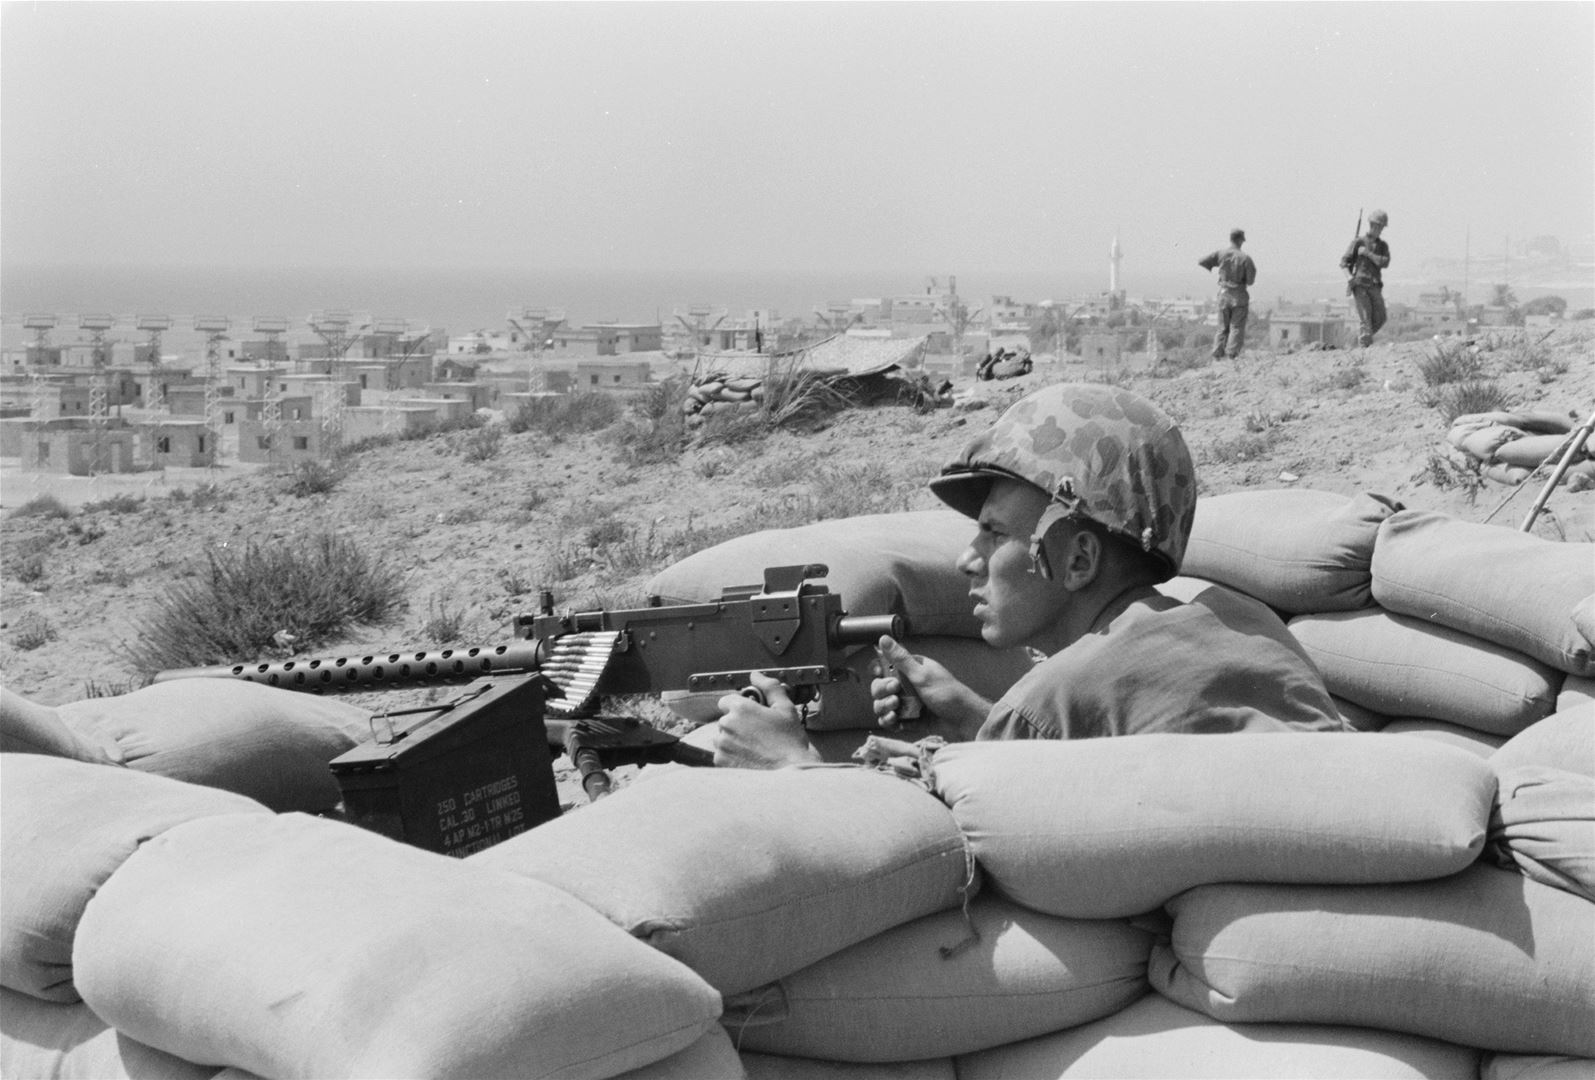 American Army in Beirut (1958)